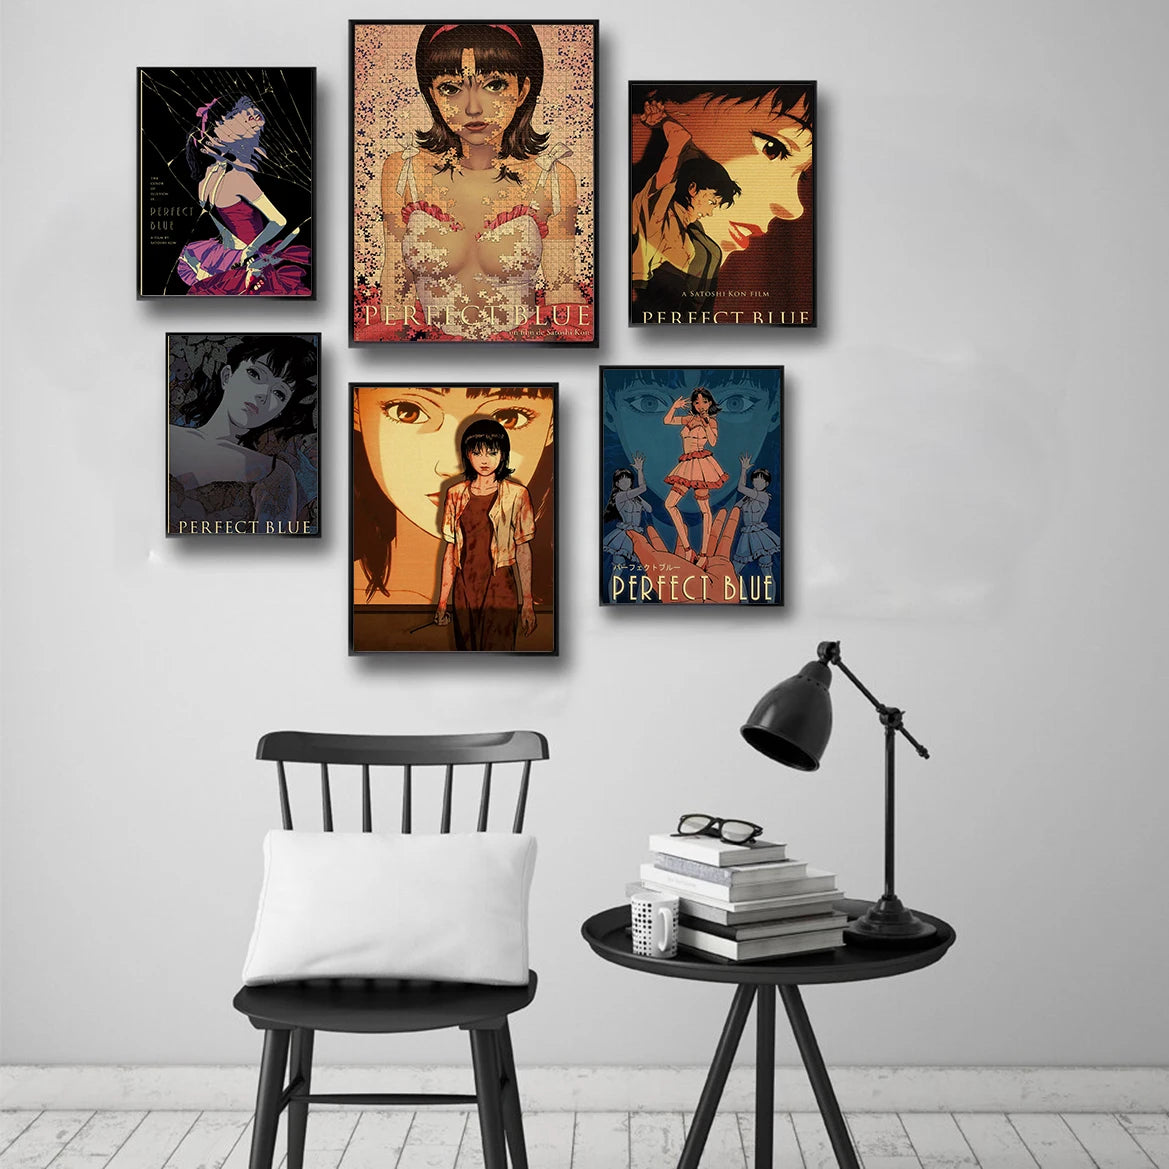 Japan Anime Perfect Blue Posters Retro Kraft Paper DIY Room Home Bar Cafe Coffee House Decor Gift Aesthetic Art Wall Paintings - NICEART